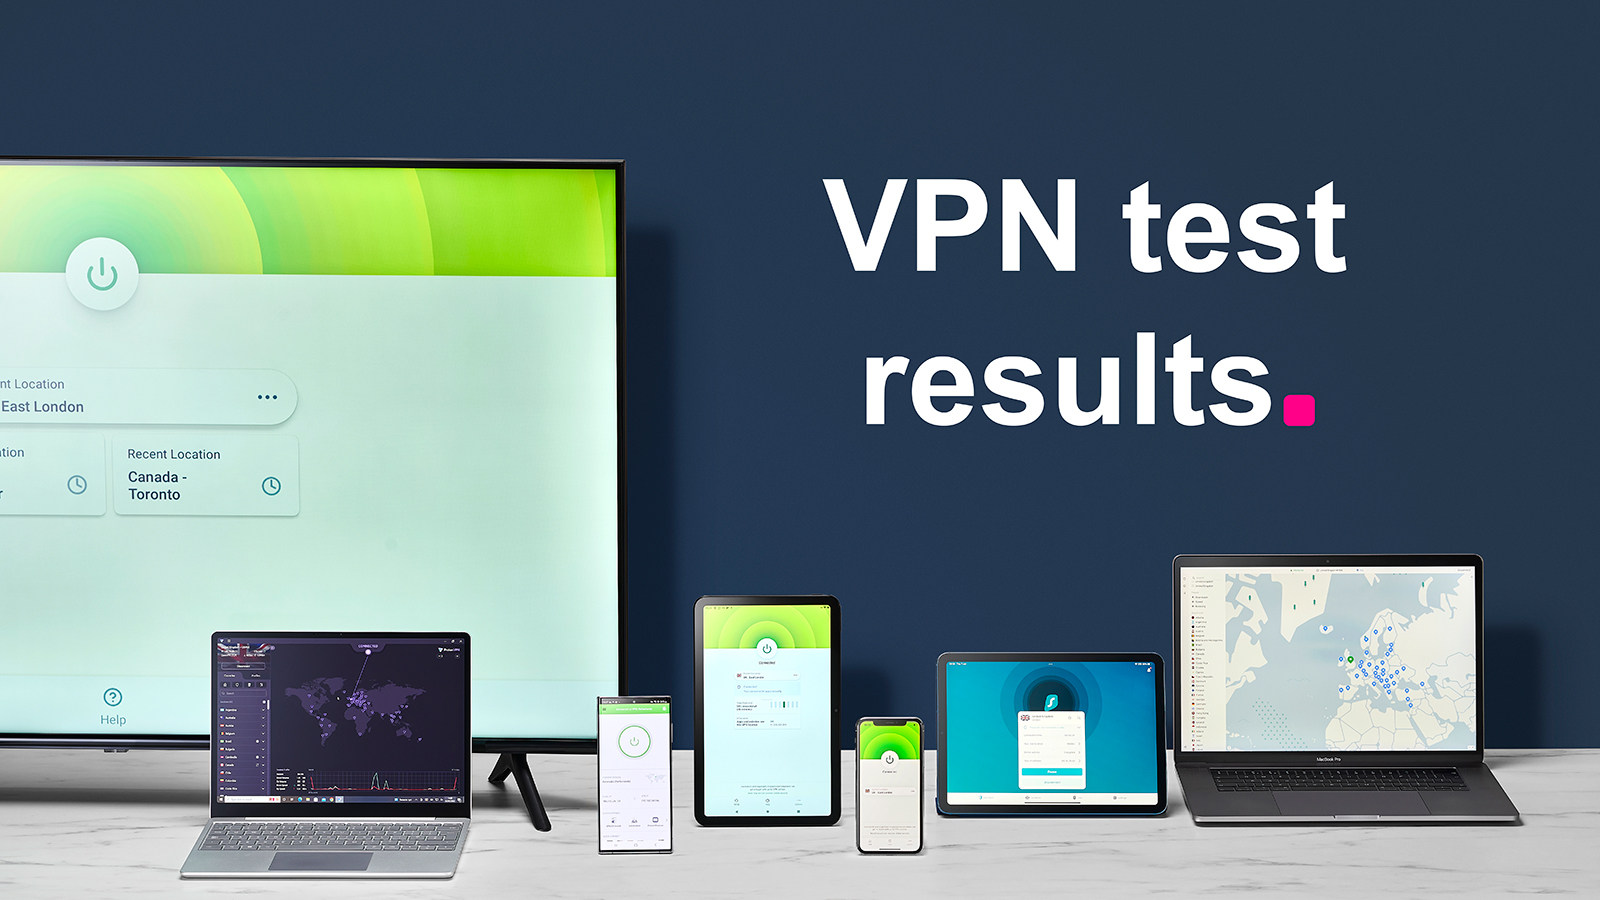 Various VPN services shown across multiple devices and platforms with 